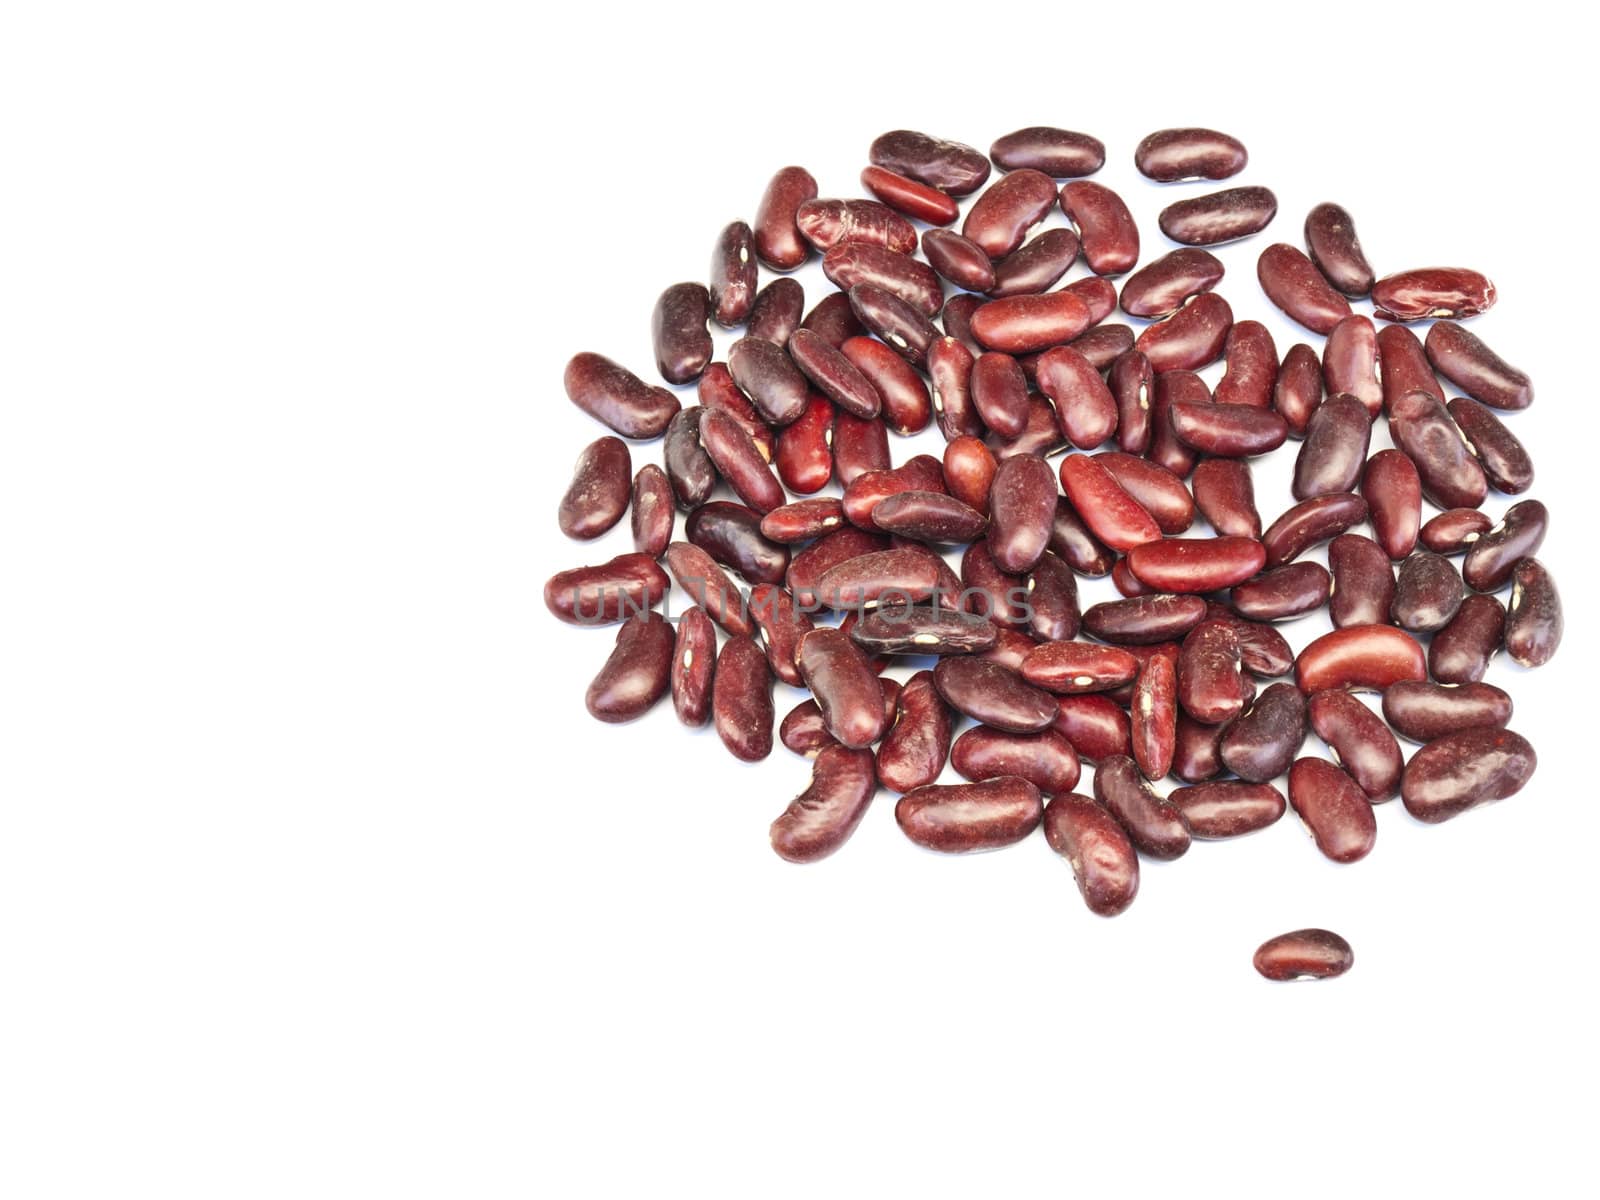 Heap of dried kidney beans or red beans isolated on white backgr by gururugu